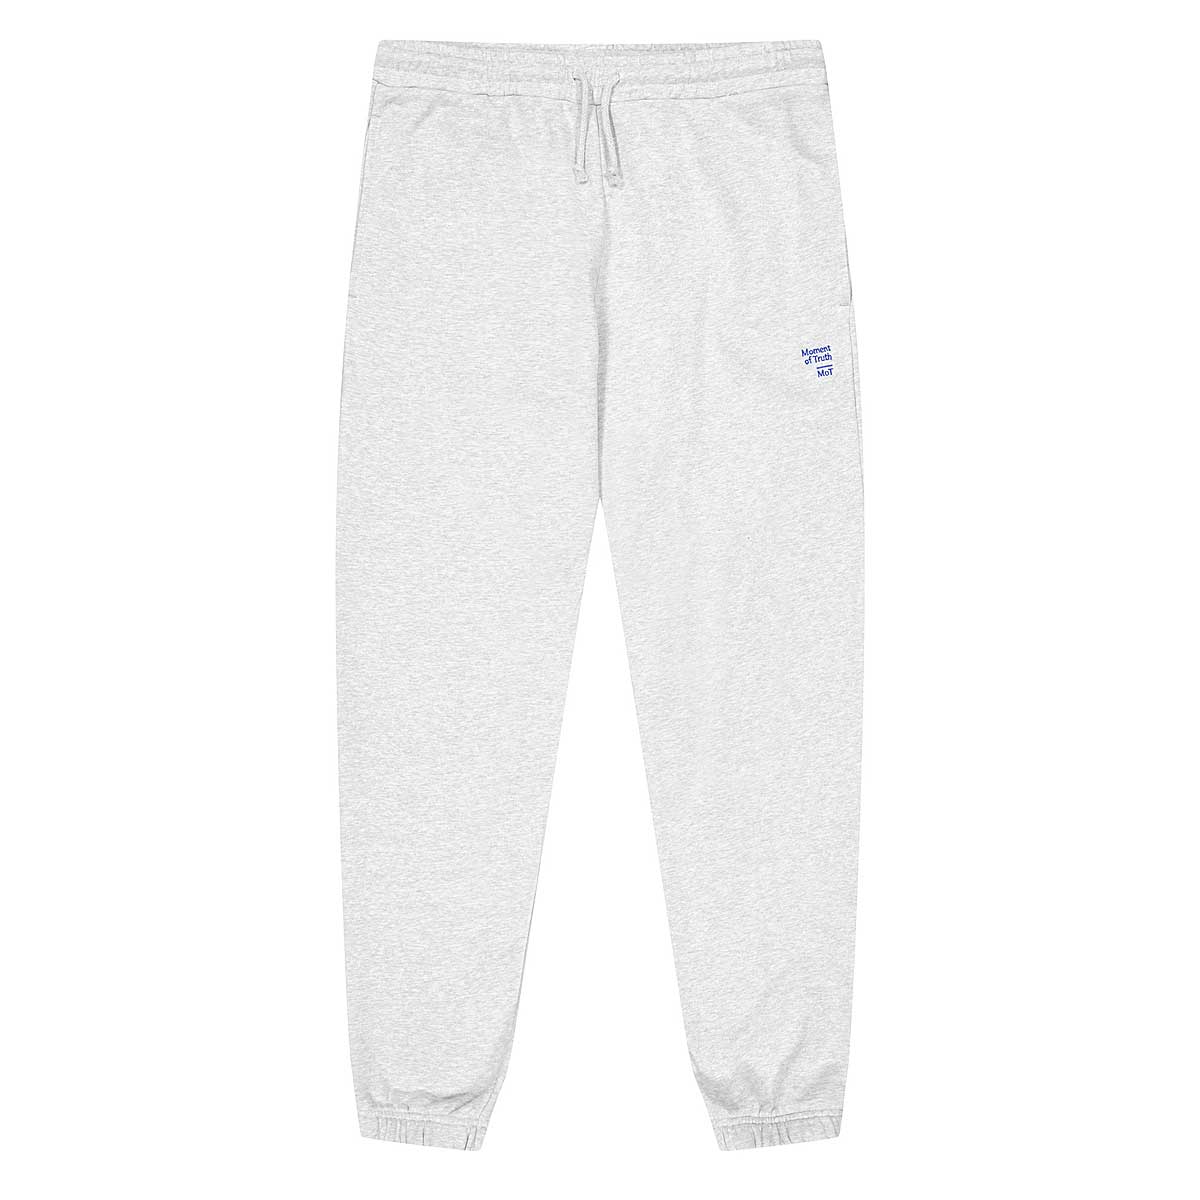 Moment Of Truth Lux Sweatpants, Light Grey Heather